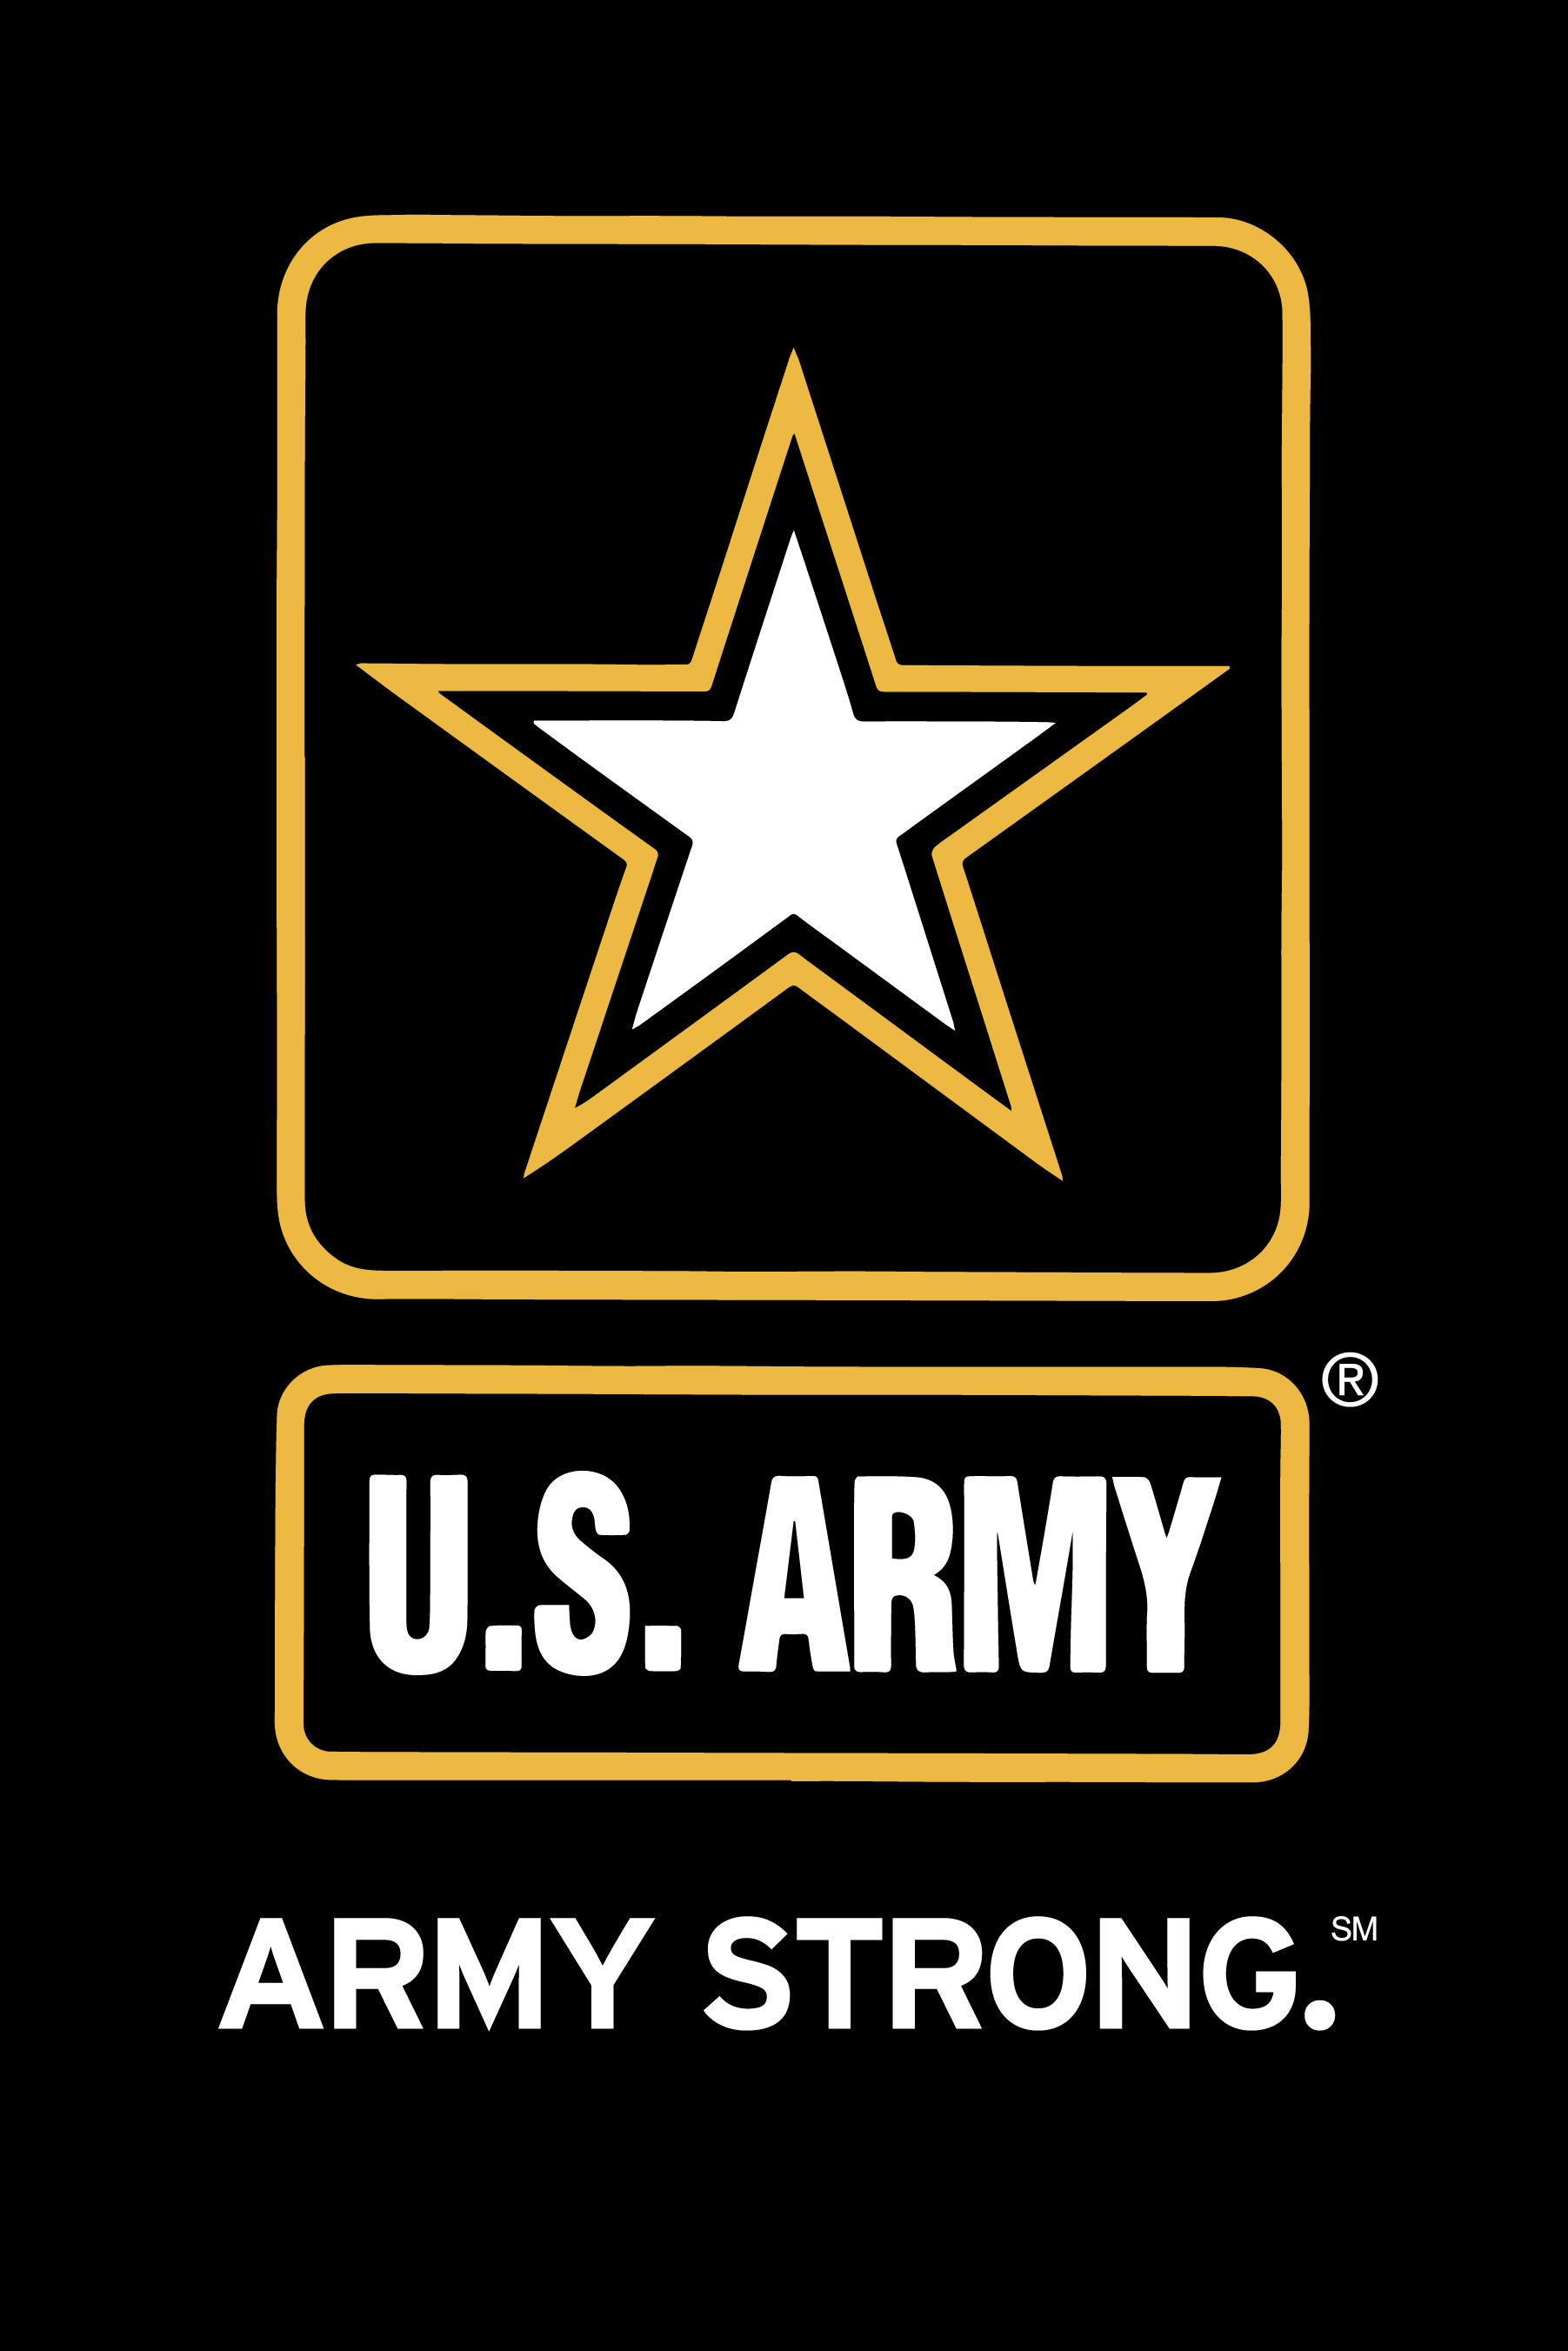 U.S. Army Strong - 18x12